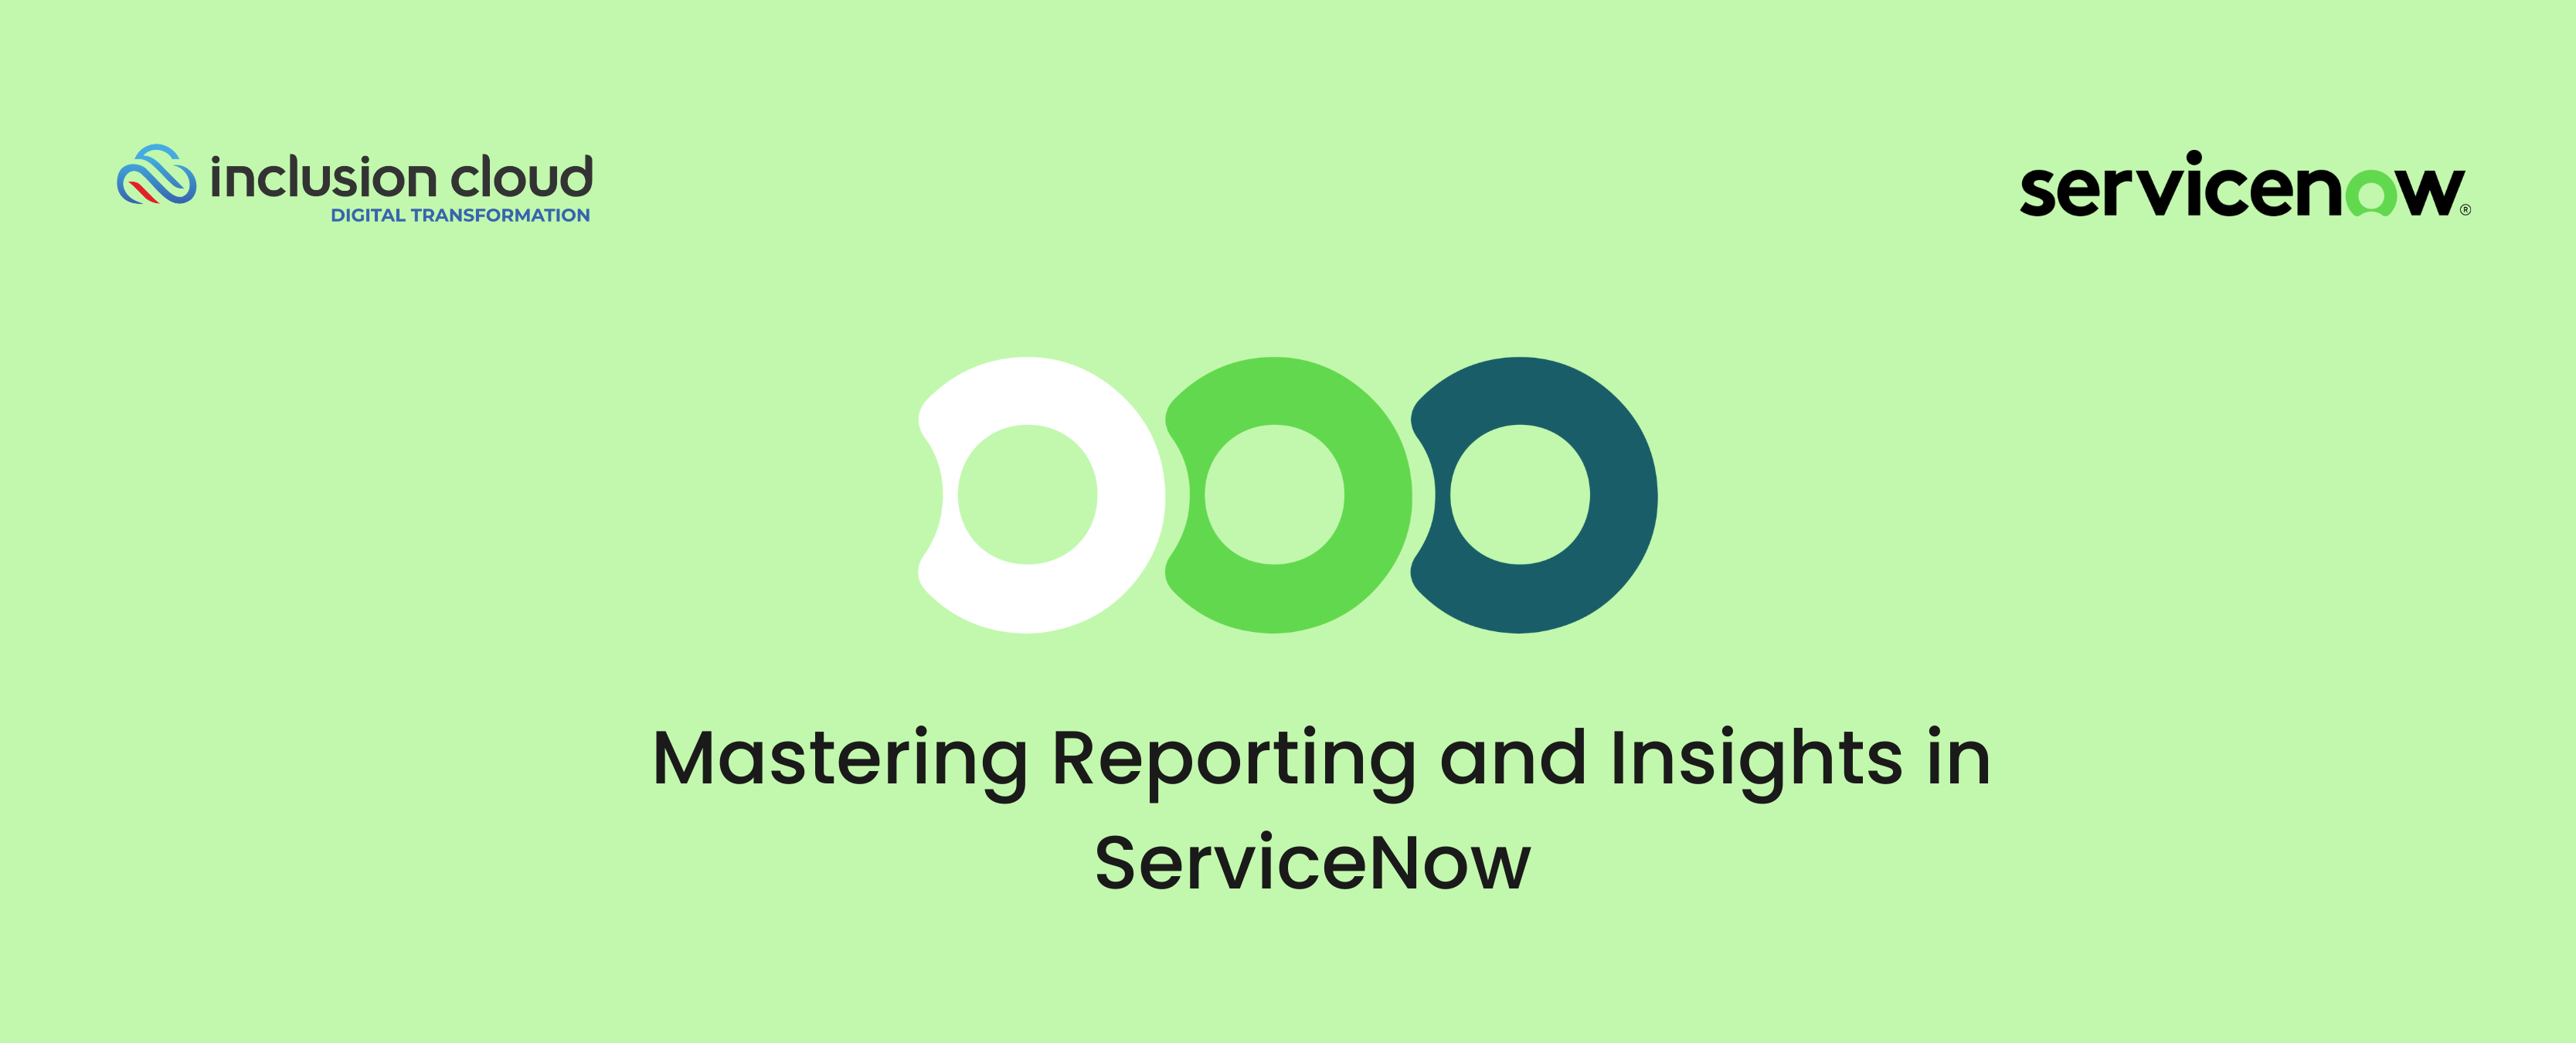 Optimize Reporting and Insights - How To ServiceNow